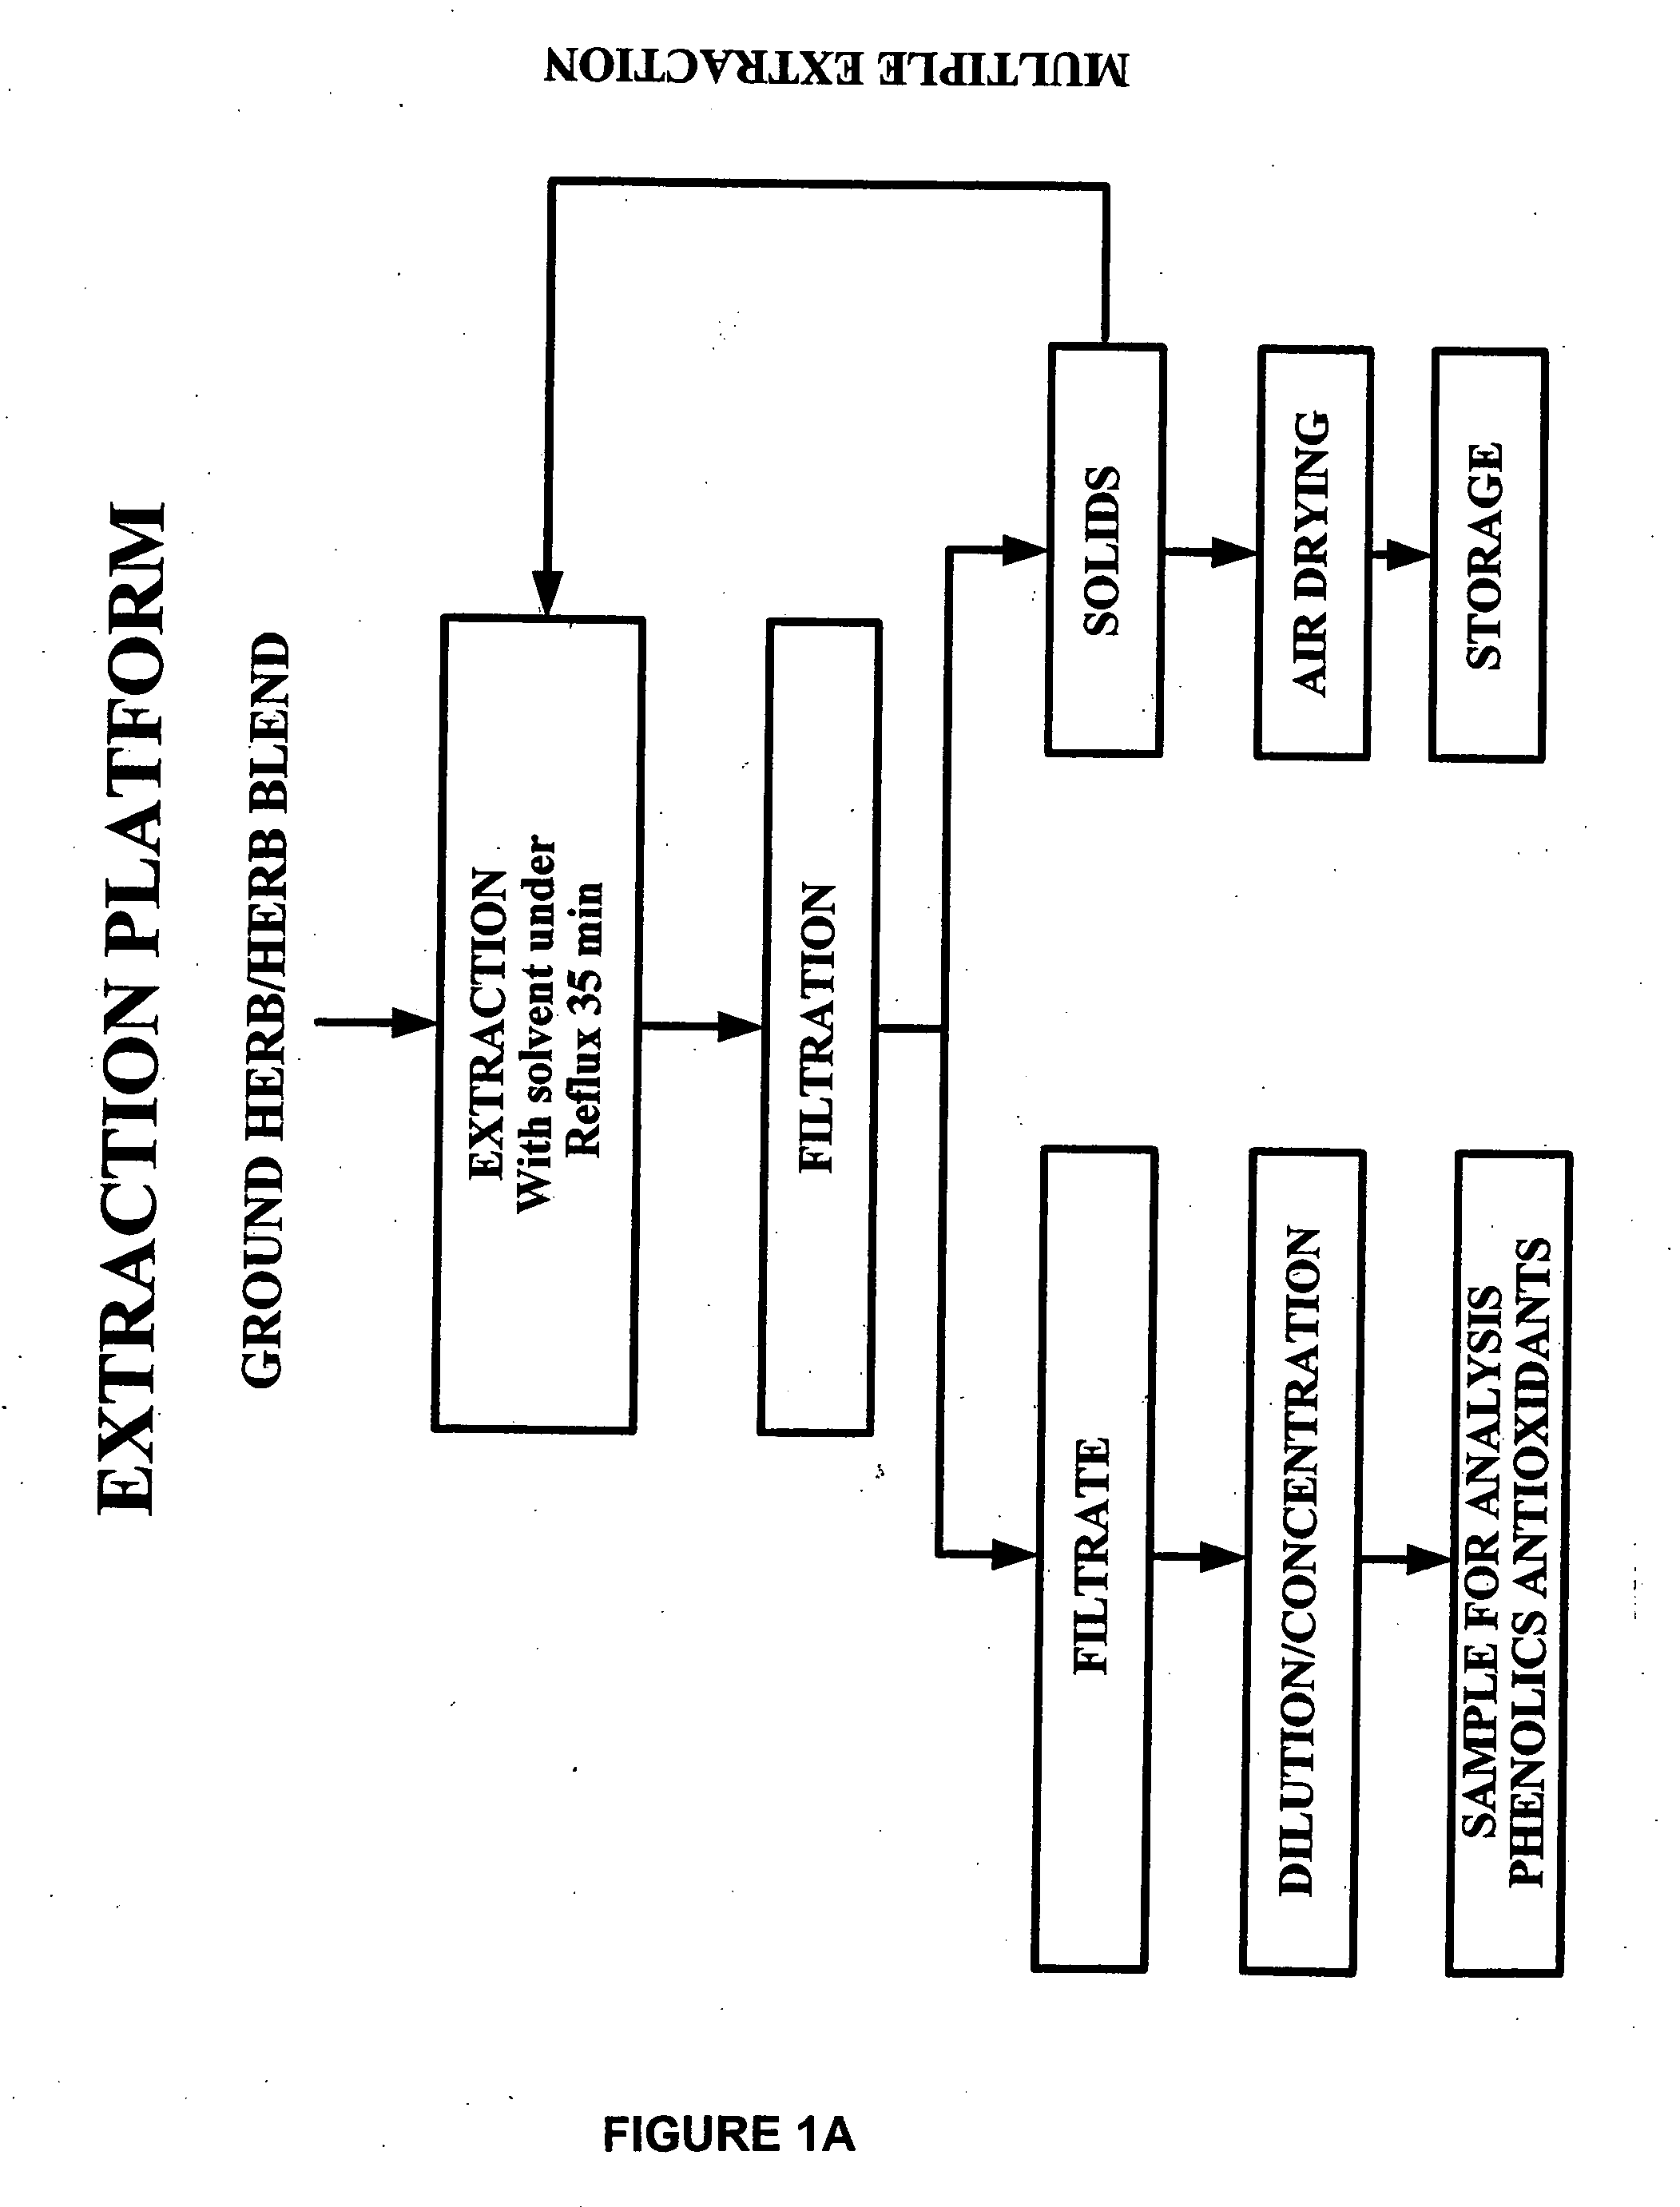 Compositions of botanical extracts for treating malignancy-associated changes